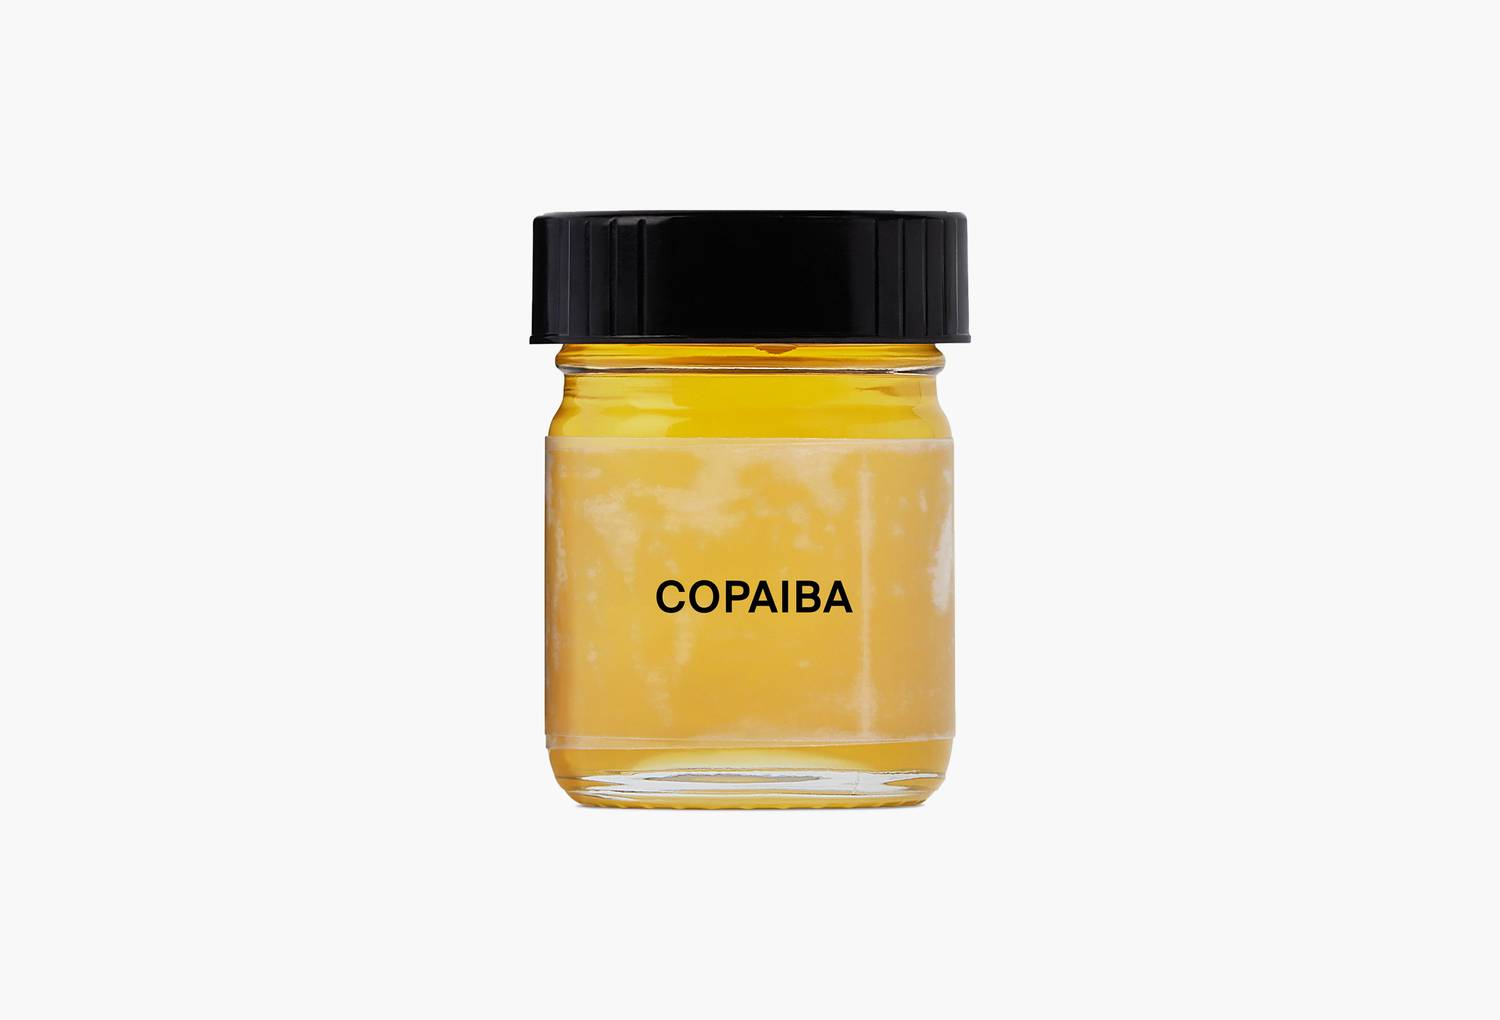 Copaiba Oil in natural form